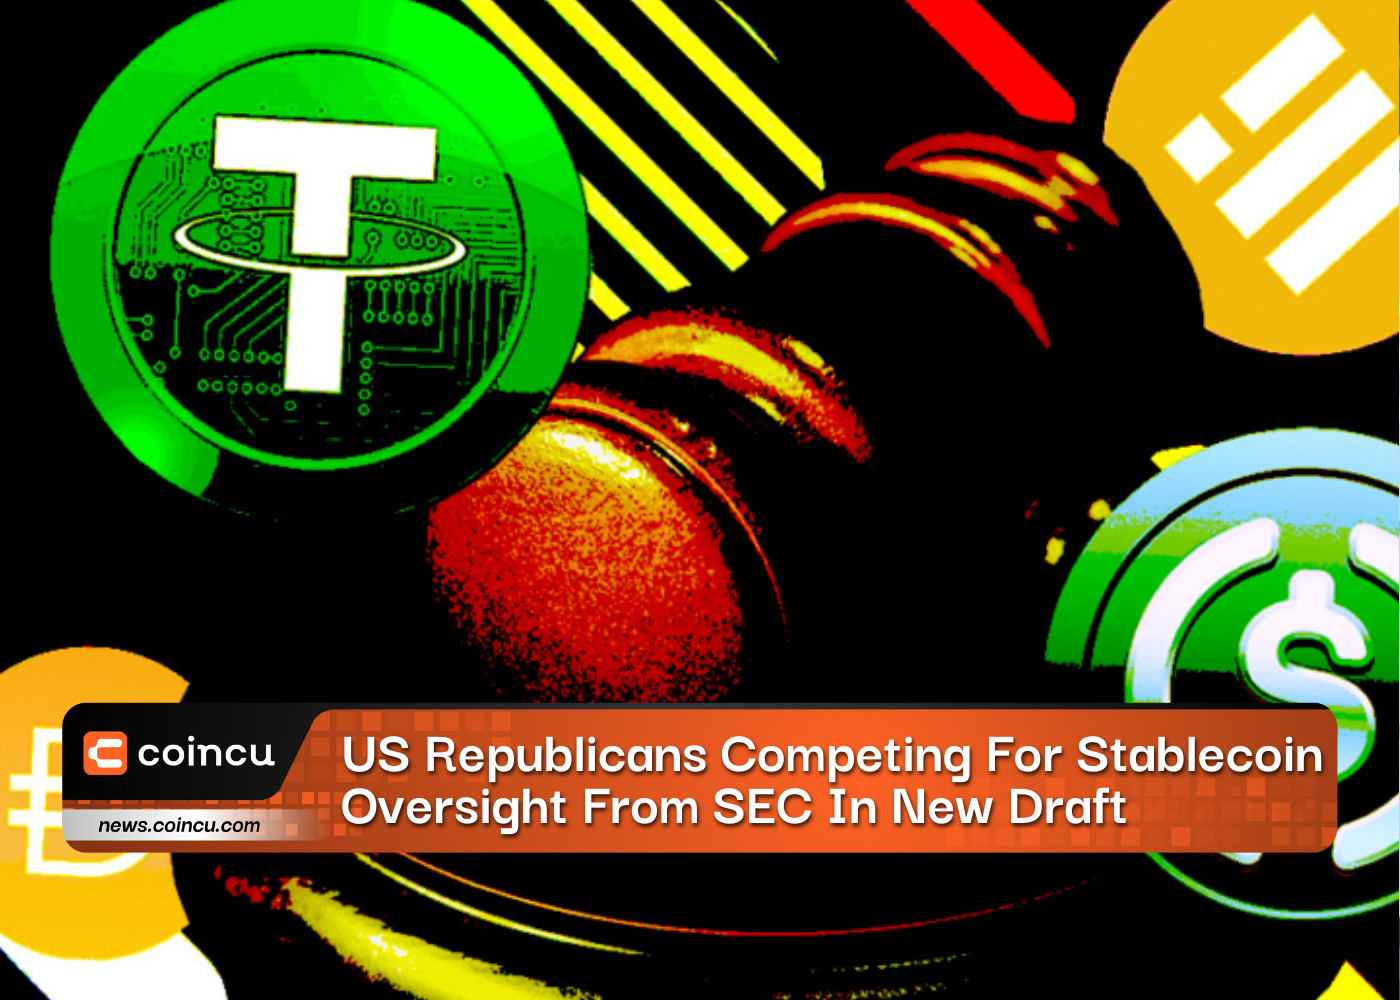 US Republicans Competing For Stablecoin Oversight From SEC In New Draft